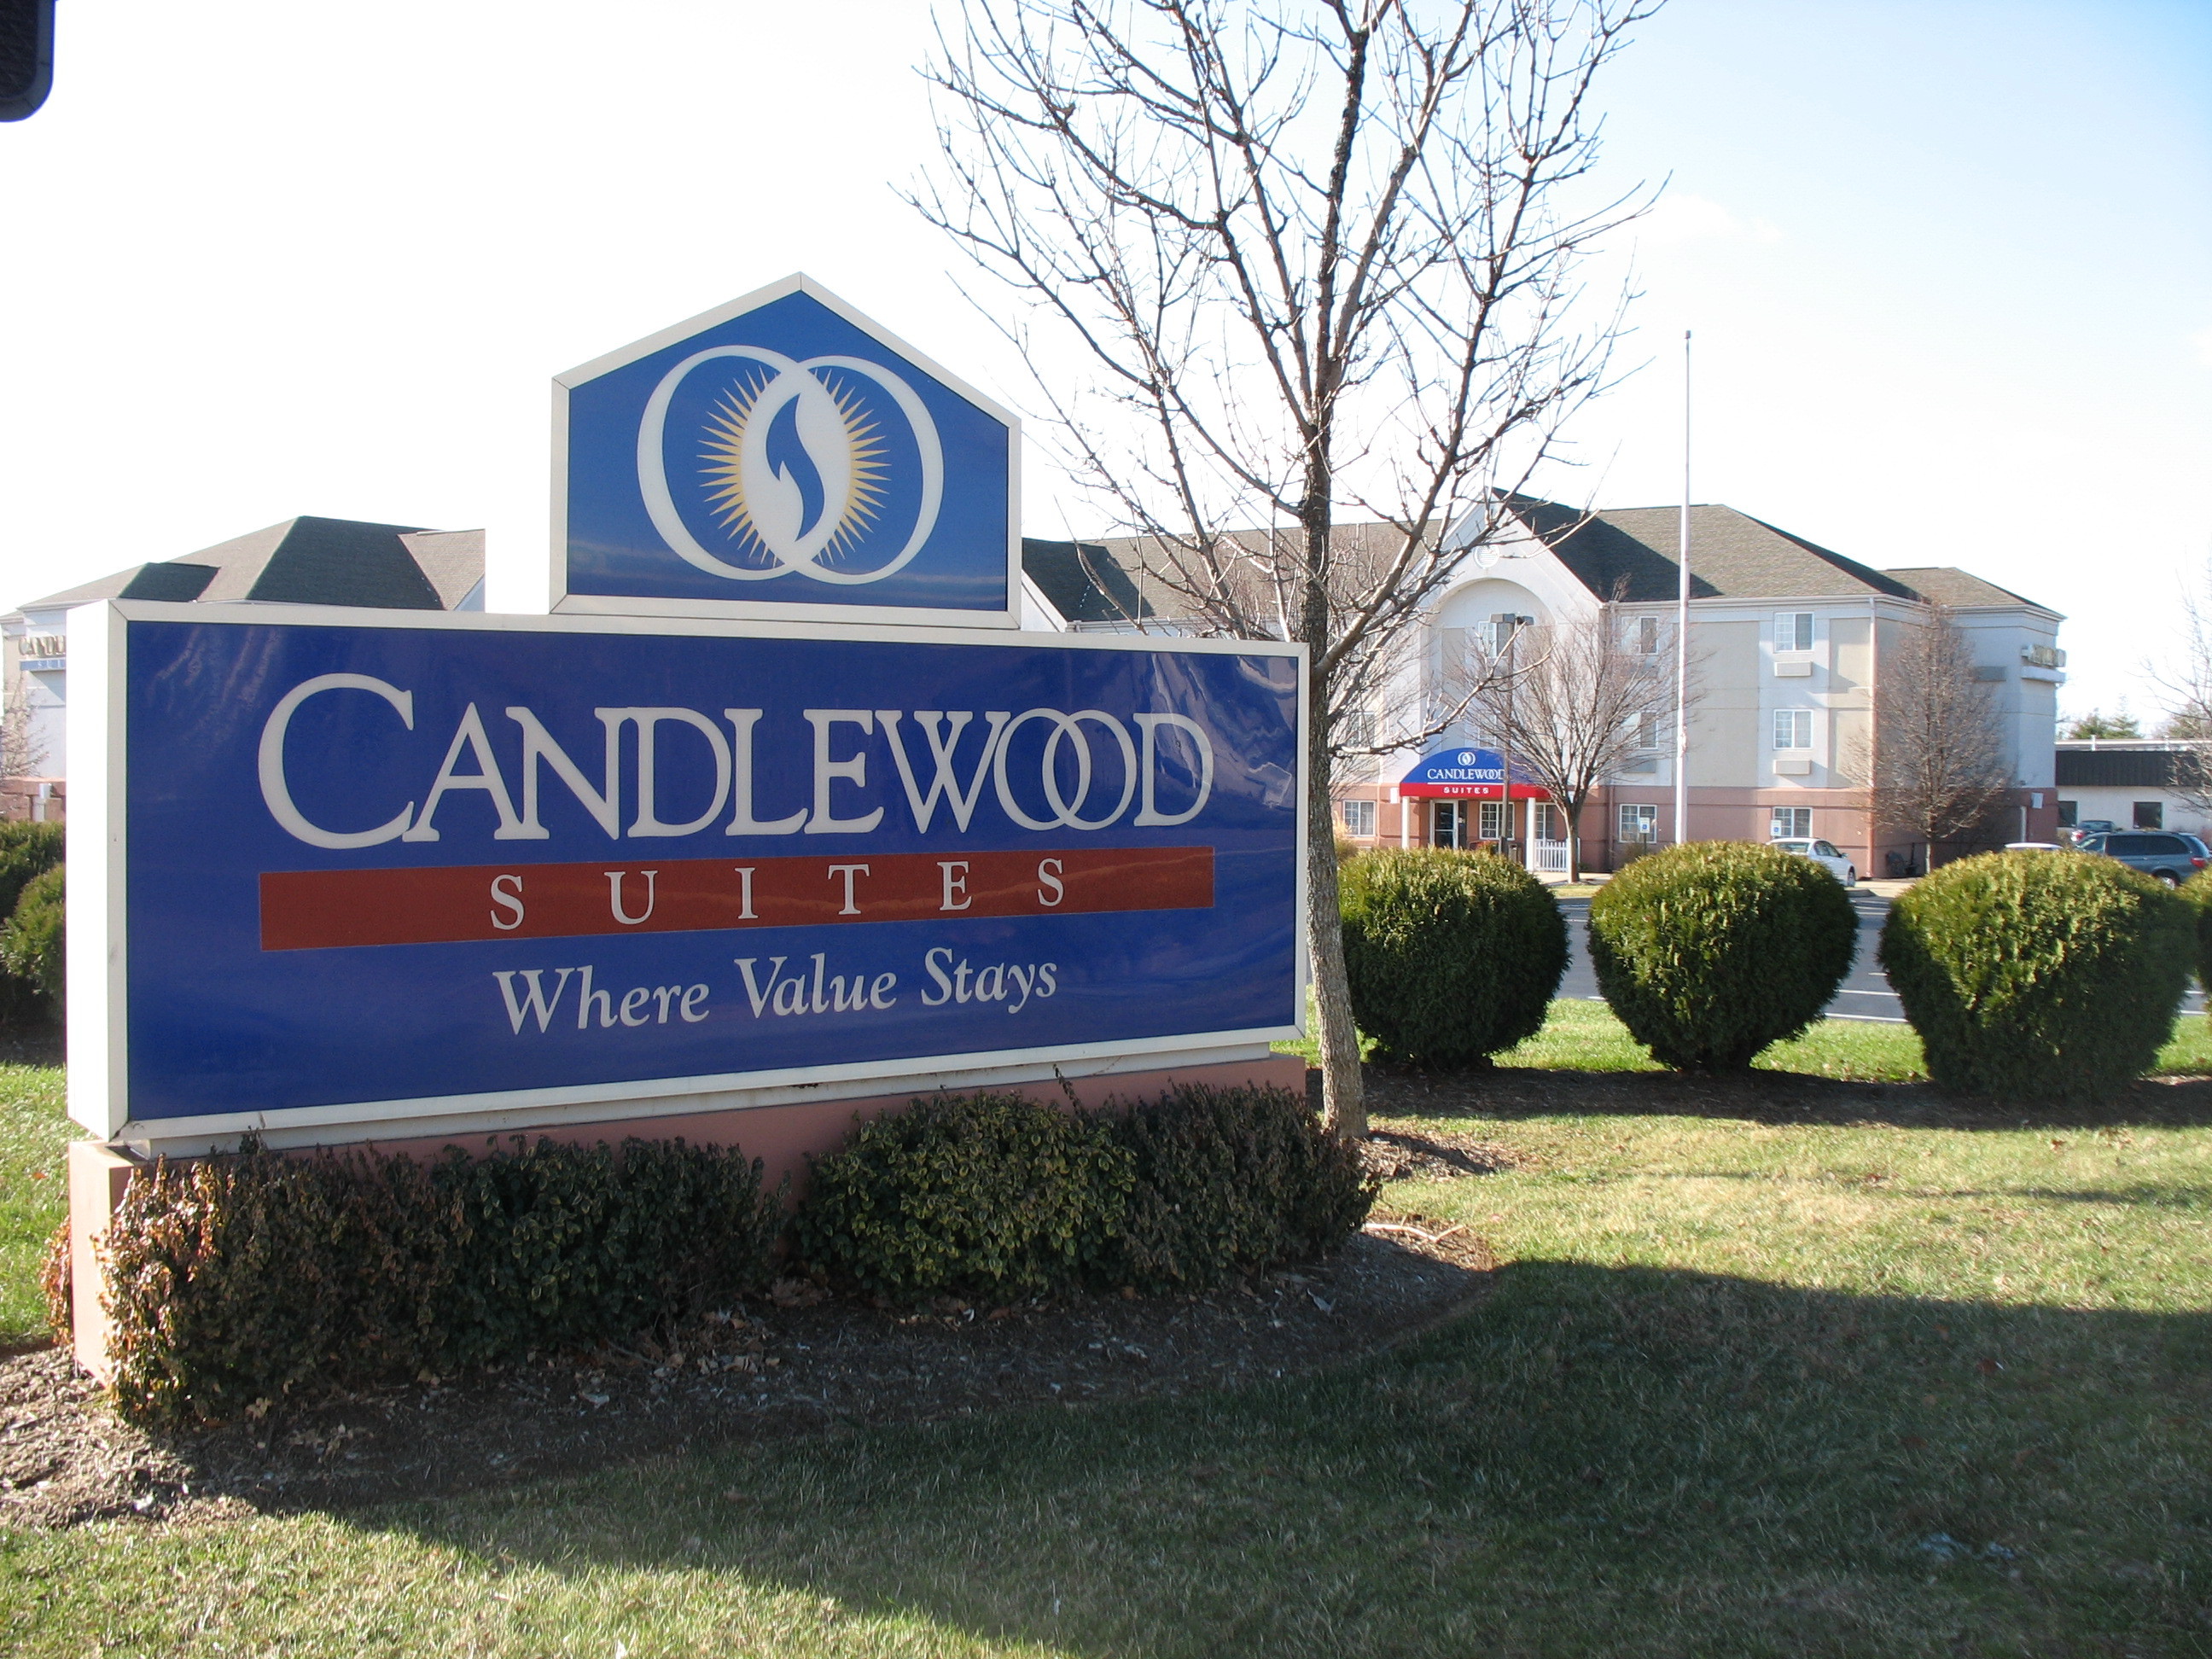 Photo of Candlewood Suites Louisville East, Jeffersontown, KY